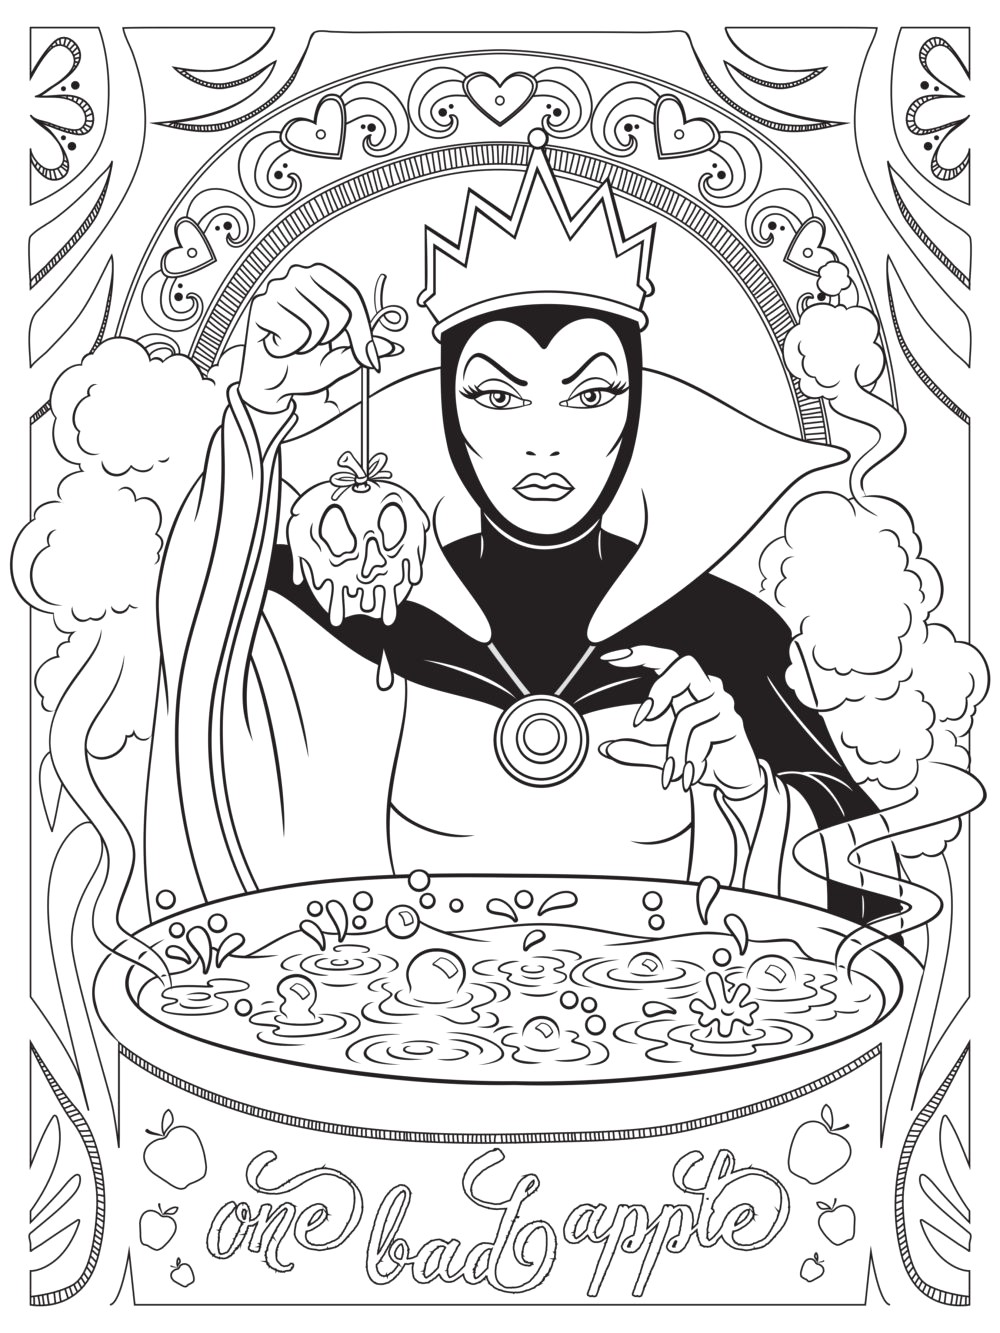 Disney Coloring Pages For Adults Best Coloring Pages For Kids